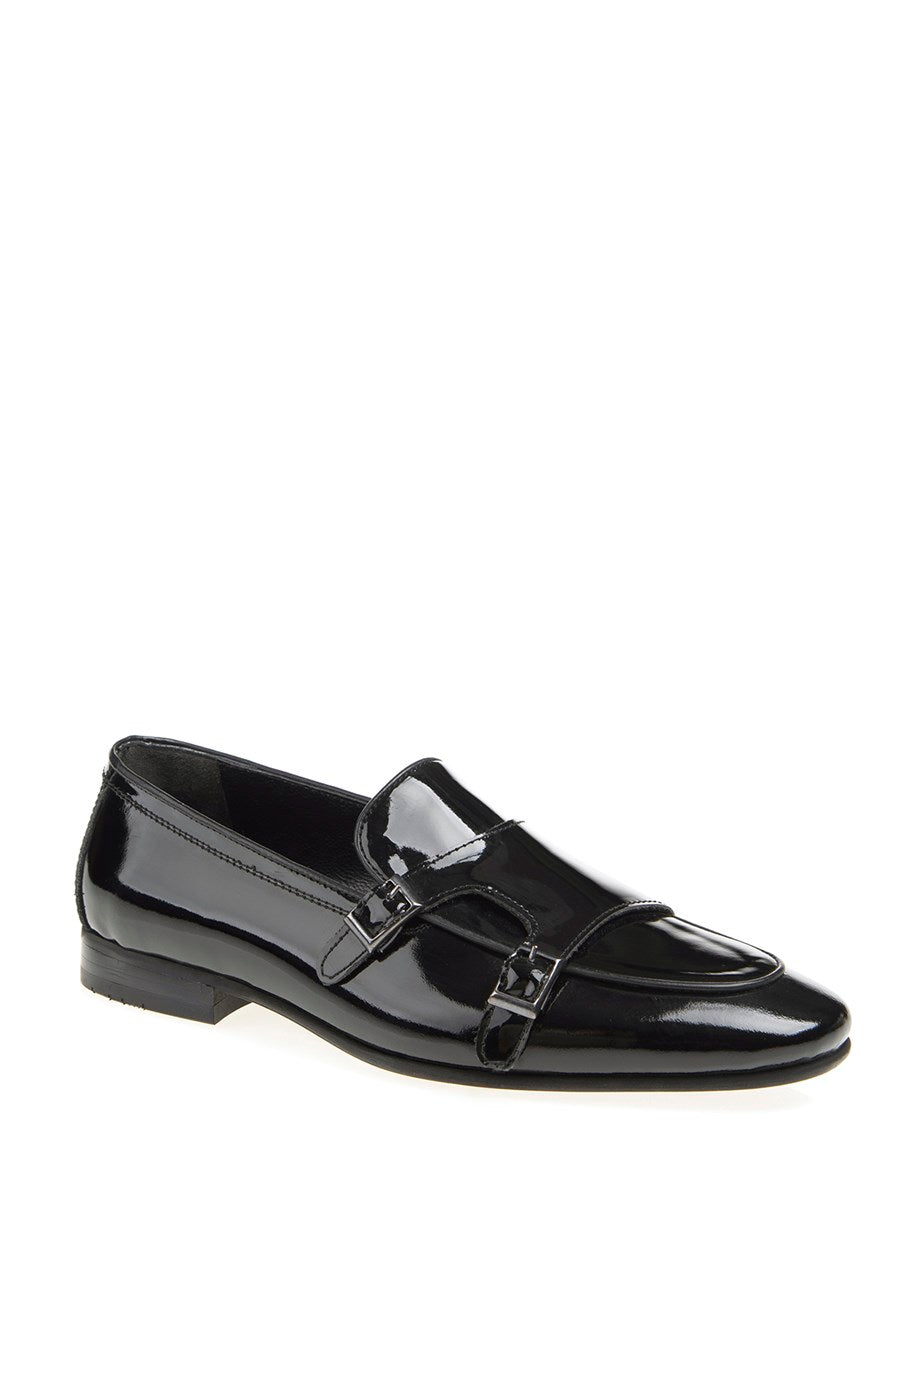 Neolite Sole Genuine Leather Buckle Patent Leather Shoes - MENSTYLEWITH